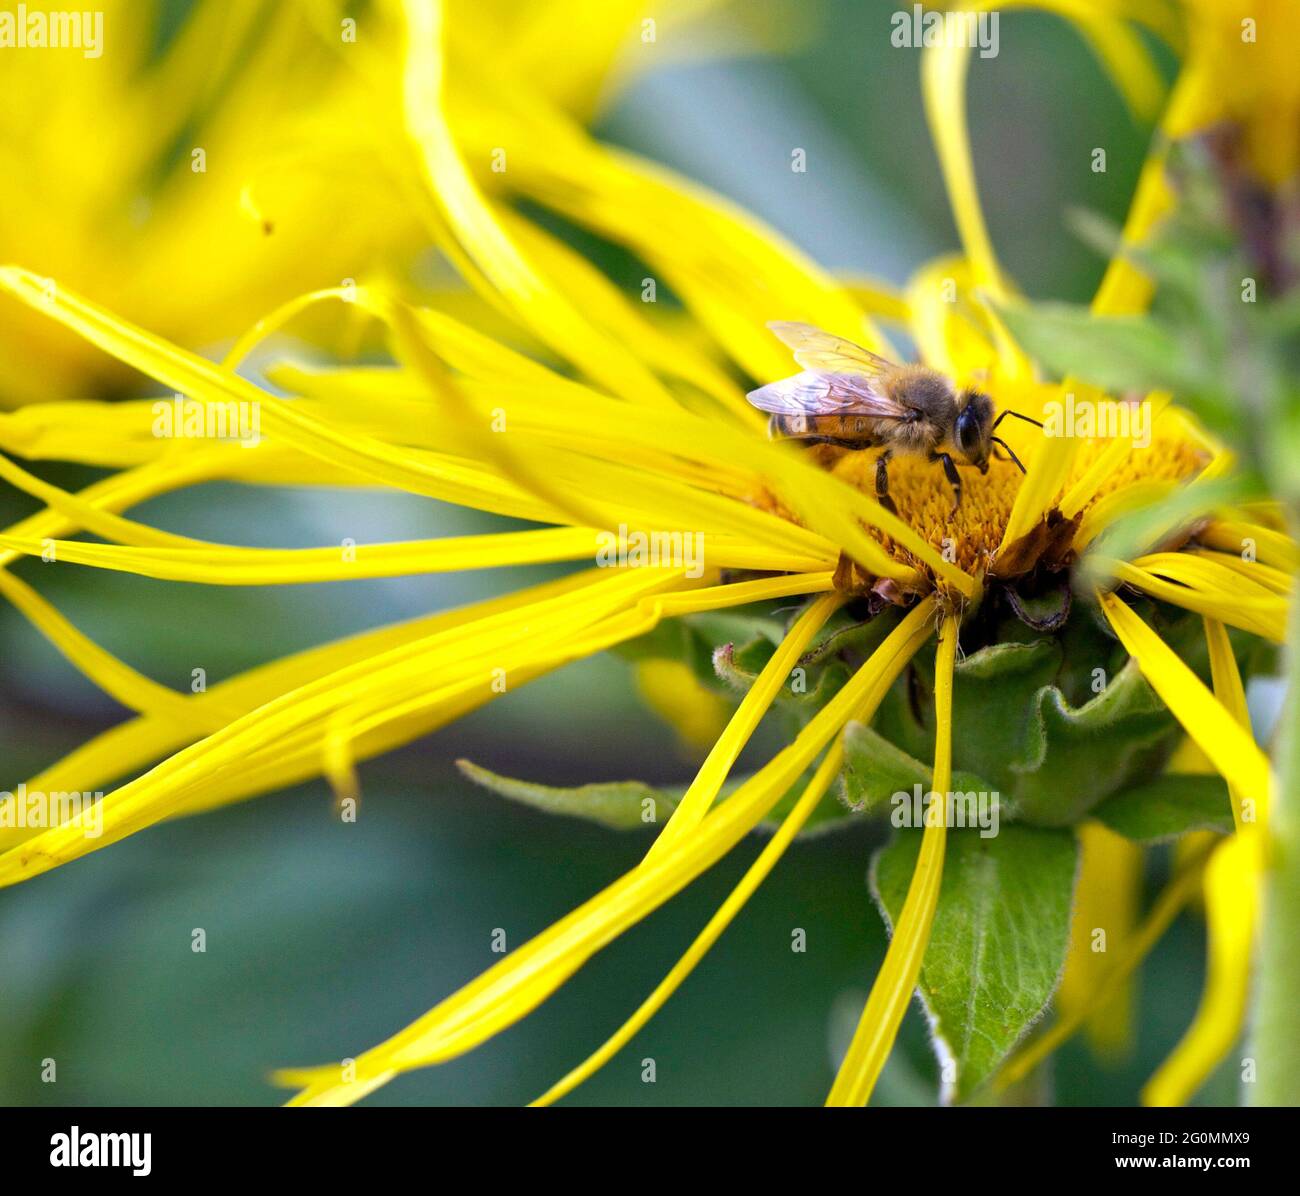 A honey bee gathering nectar from Inula Helenium (elecampane), a raggedy yellow daisy-like wildflower, also bearing a resemblance to a sunflower Stock Photo